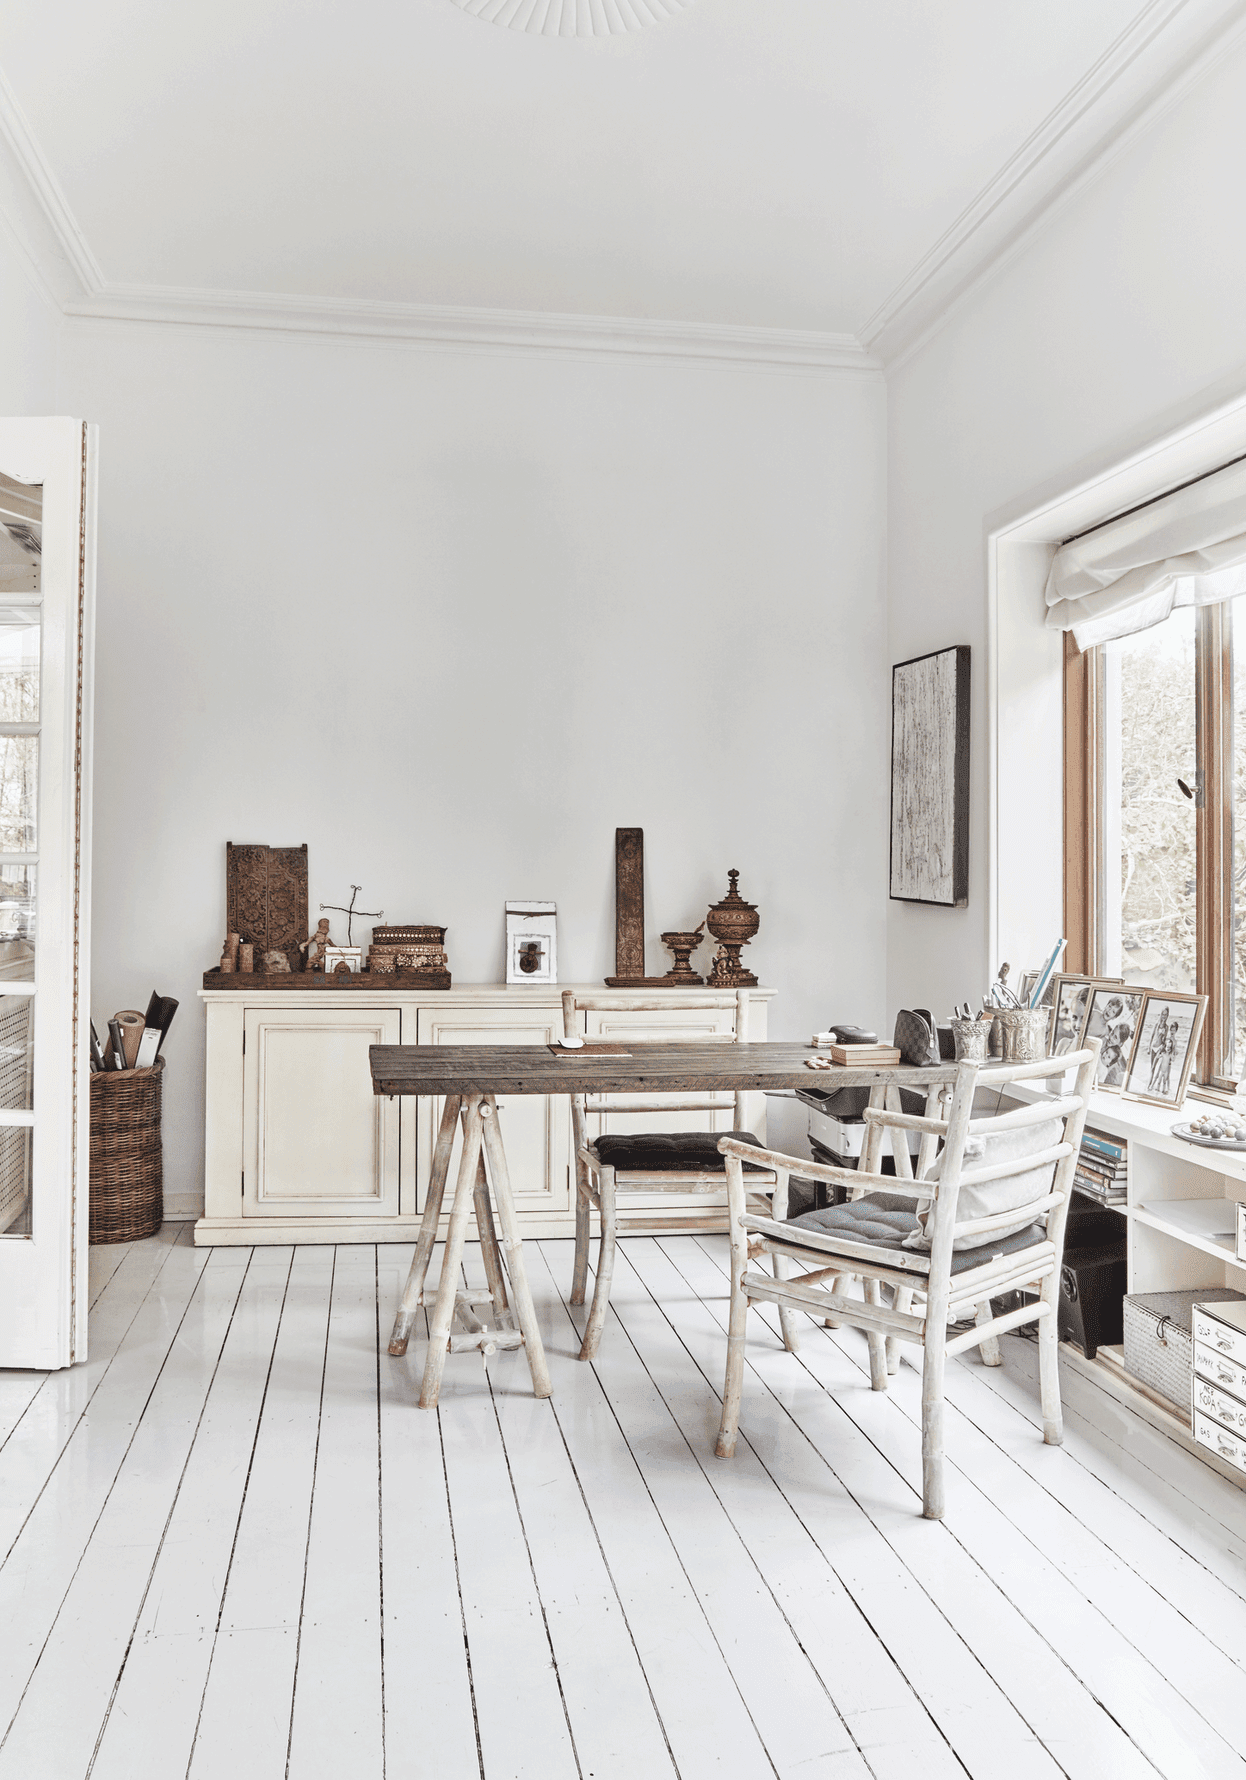 A Danish house with an beautiful blend of styles